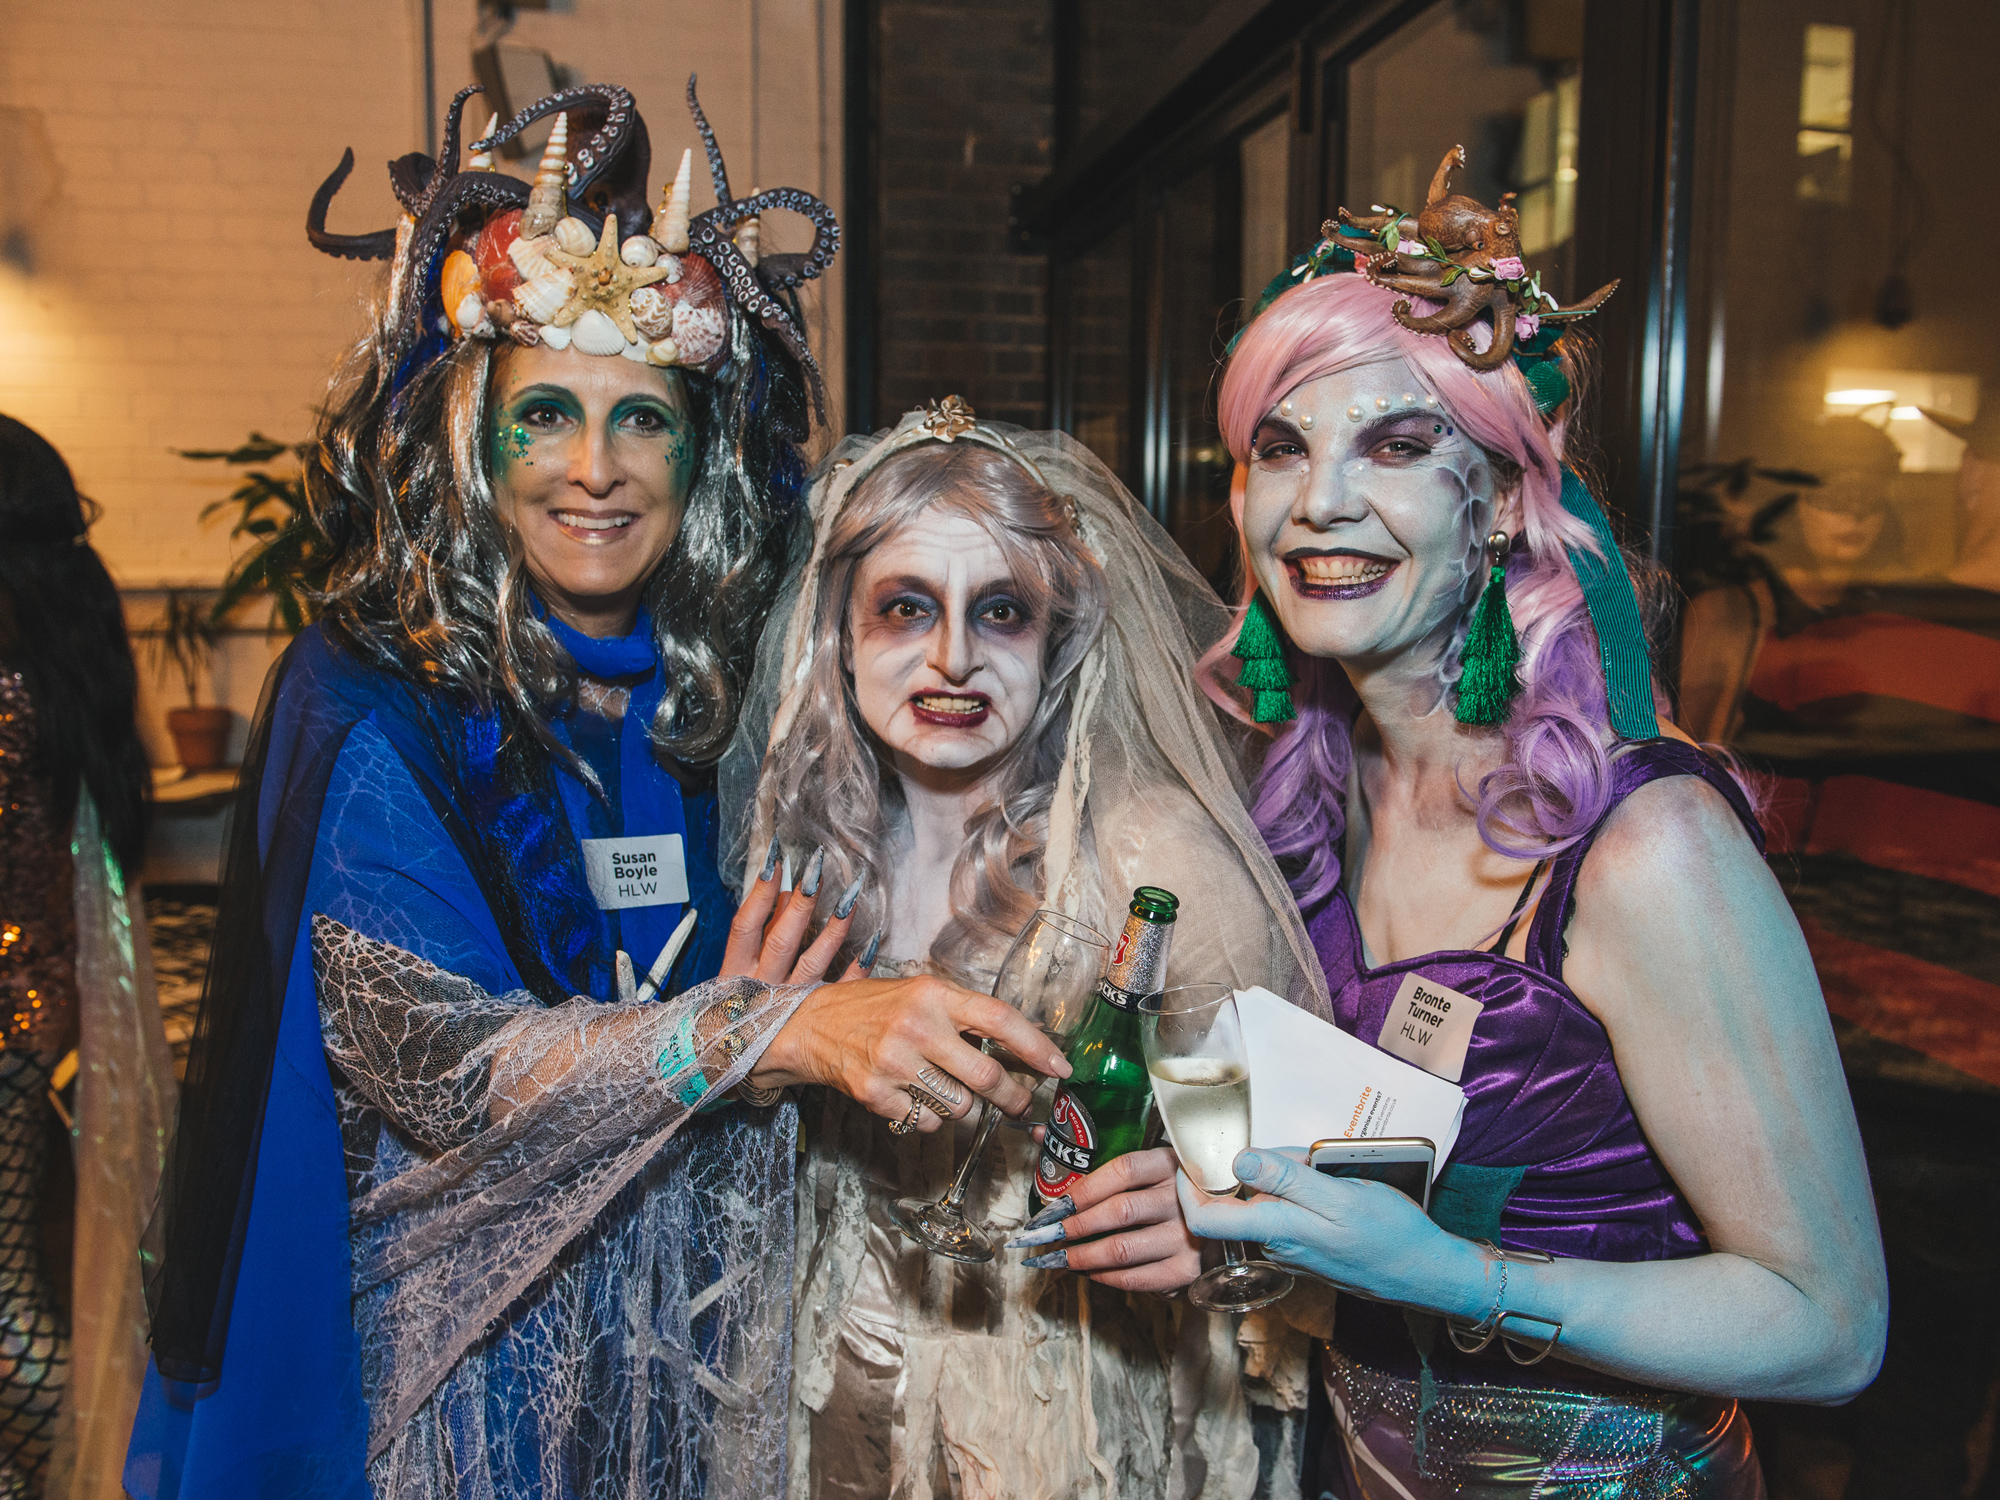 Three individuals in sea-themed costumes with elaborate headpieces, enjoying a costume event.